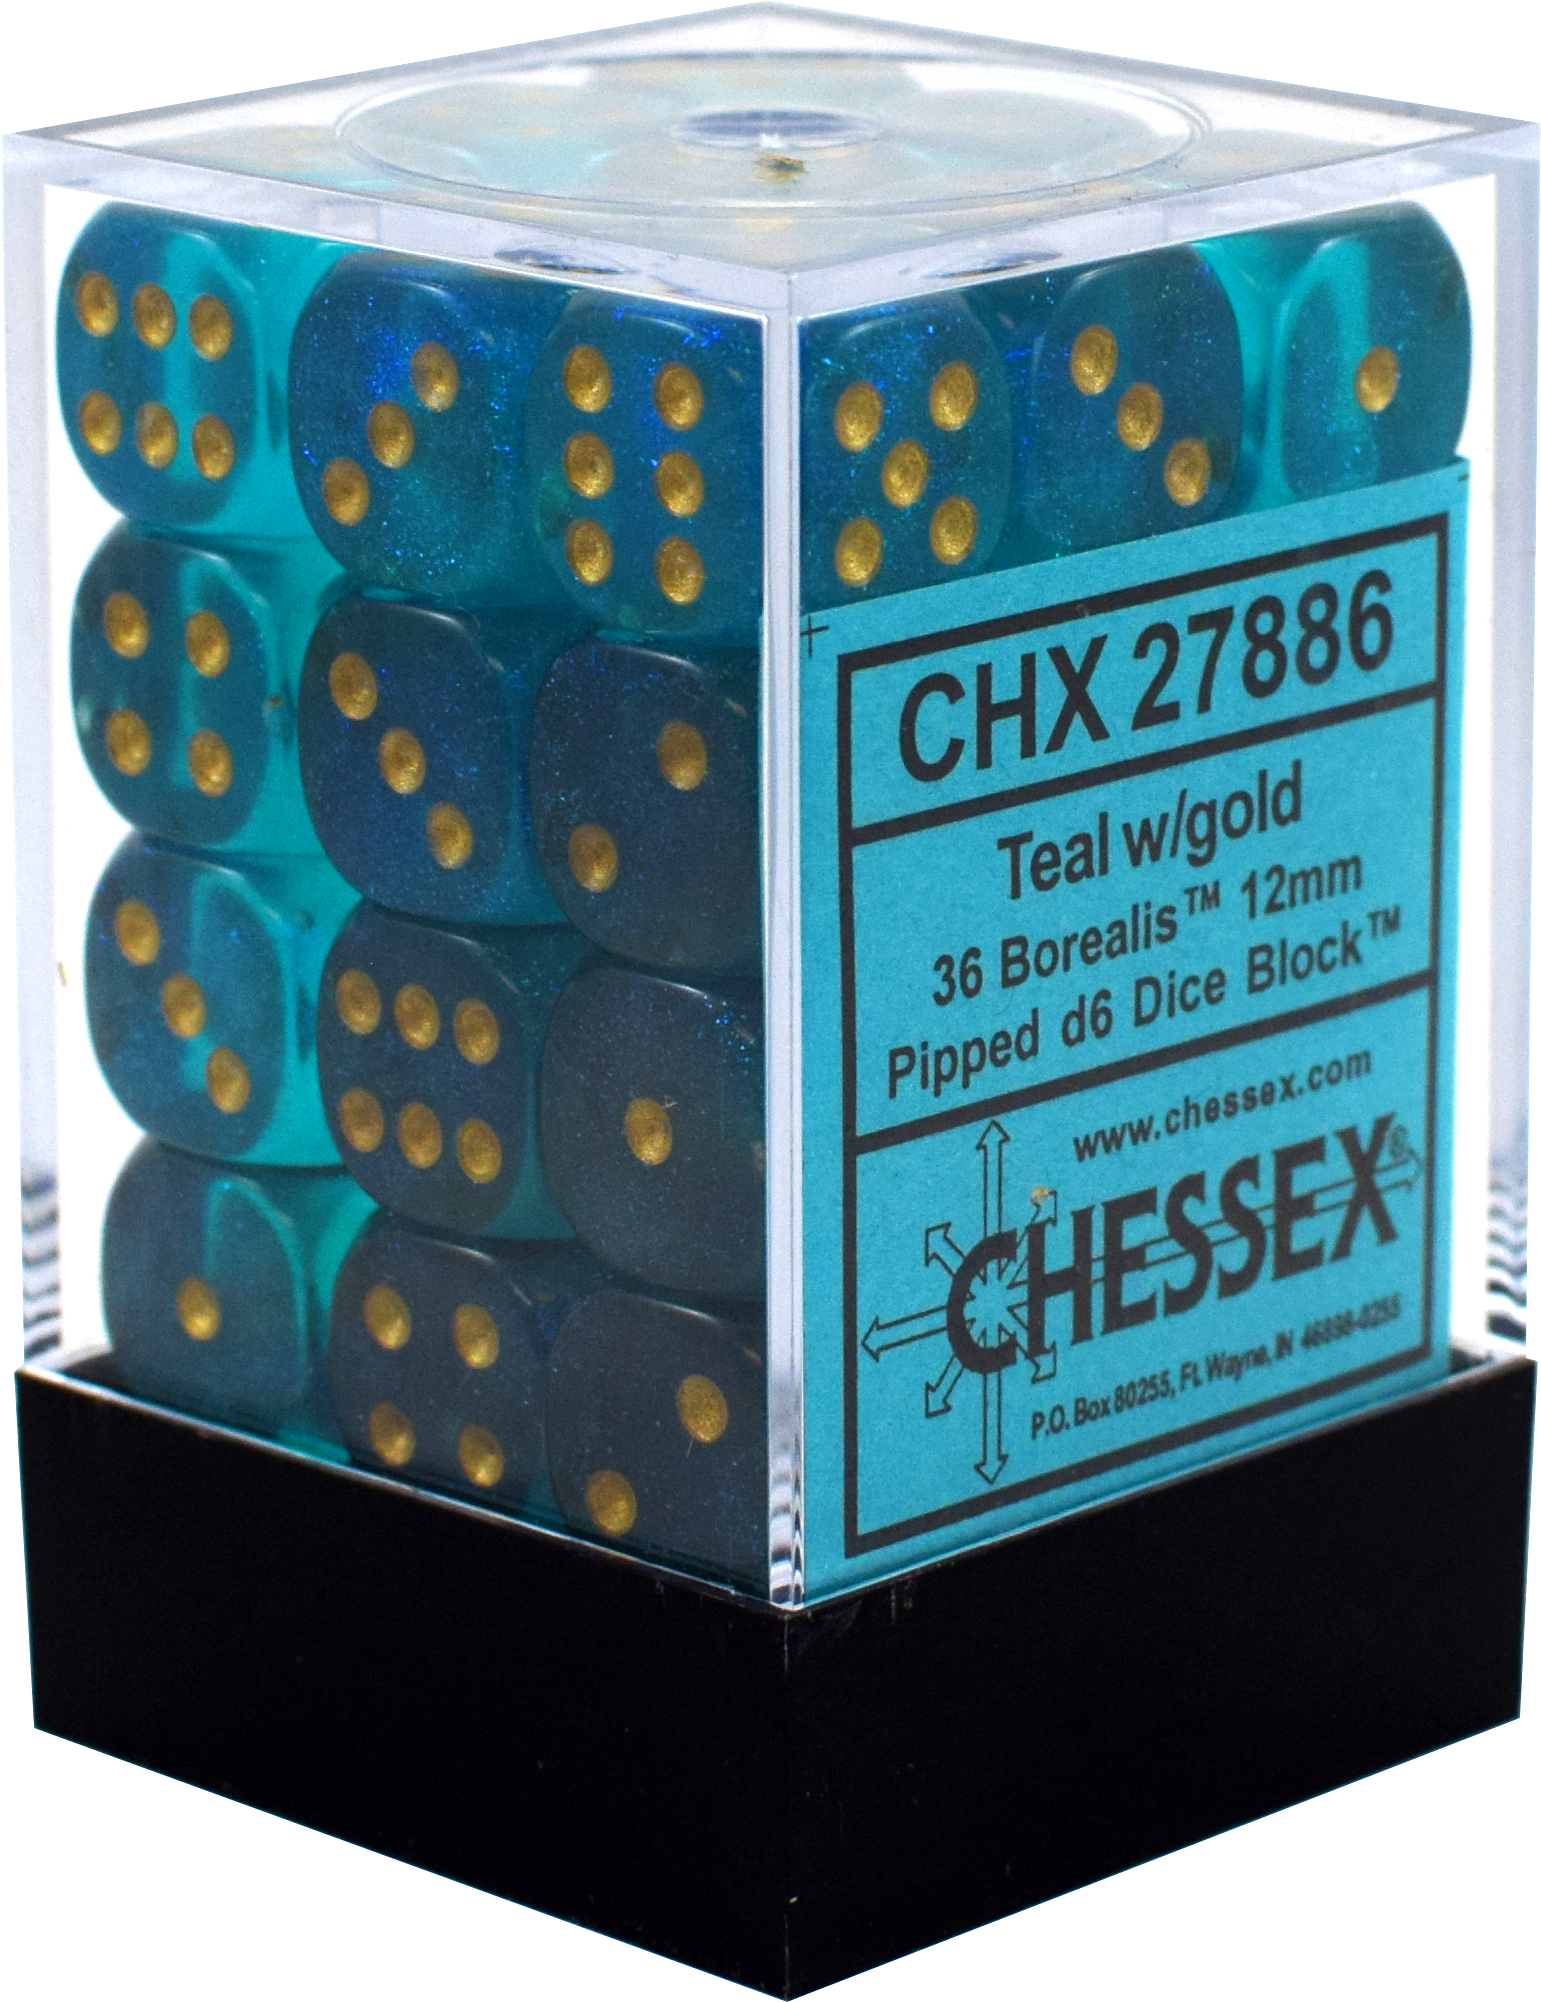 36 Borealis Teal / Gold 12mm D6 Dice Block - CHX27886 | North of Exile Games